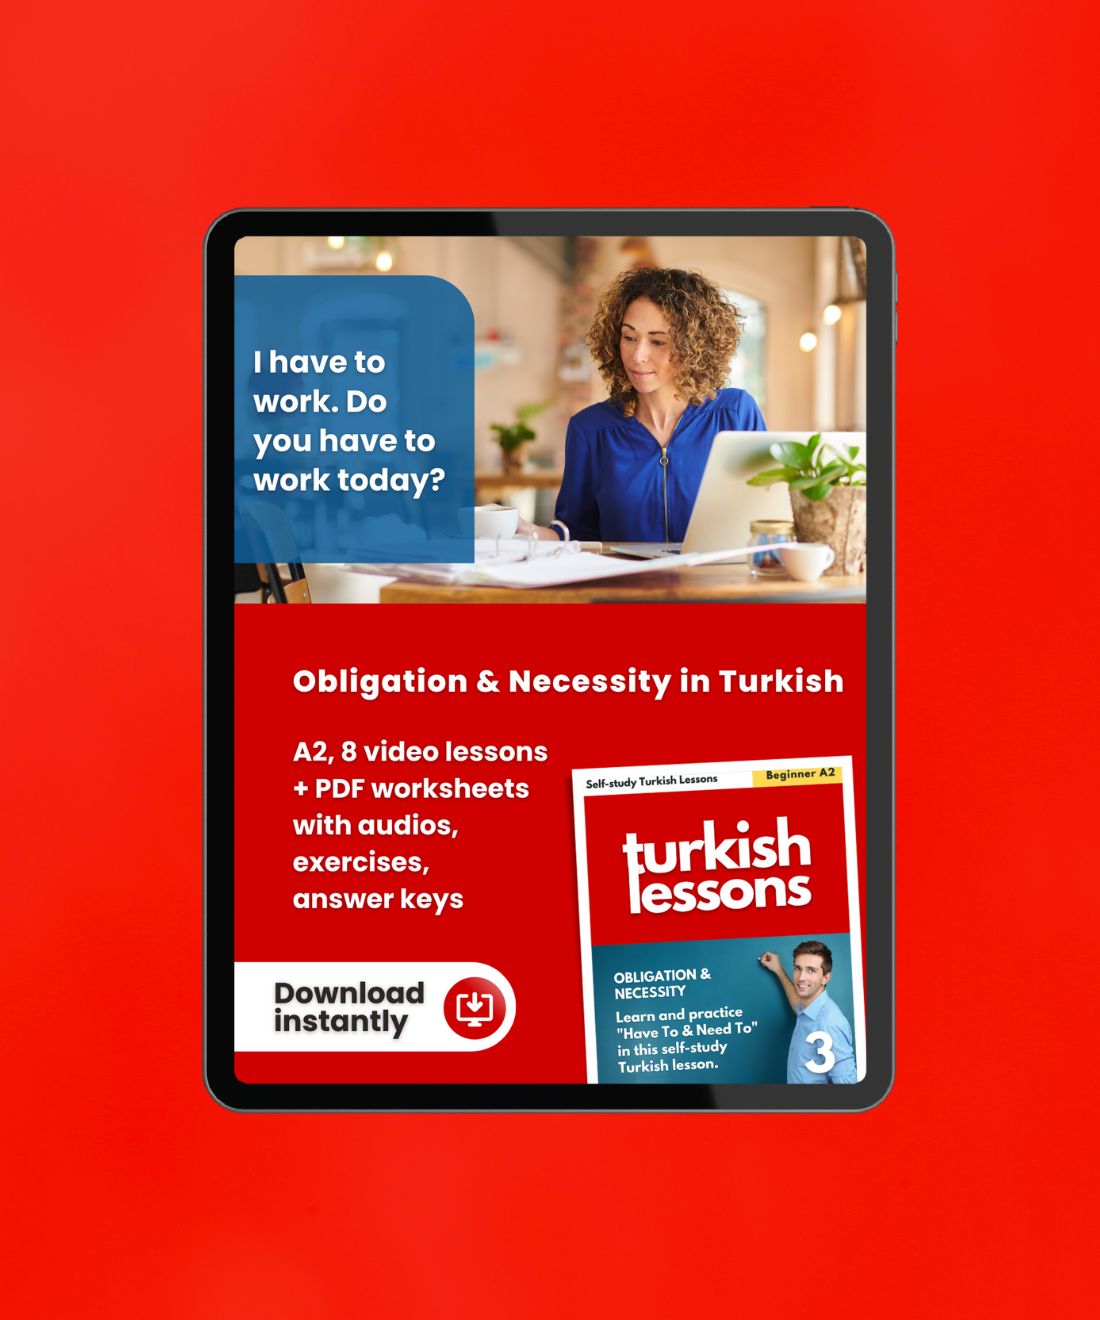 turkish lessons a2 - obligation in turkish language